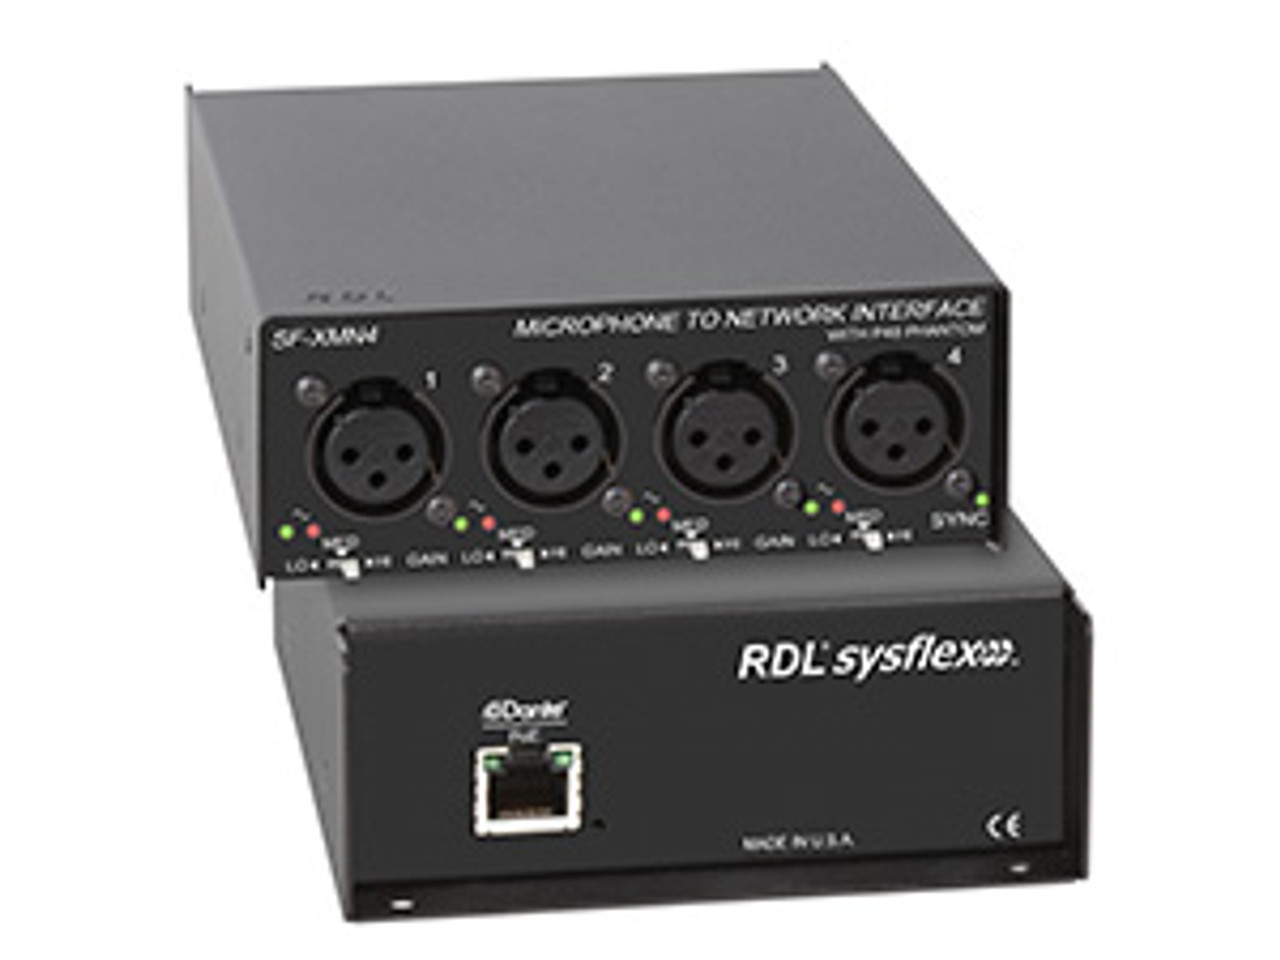 RDL SF-XMN4 Microphone to Network Interface (SF-XMN4)